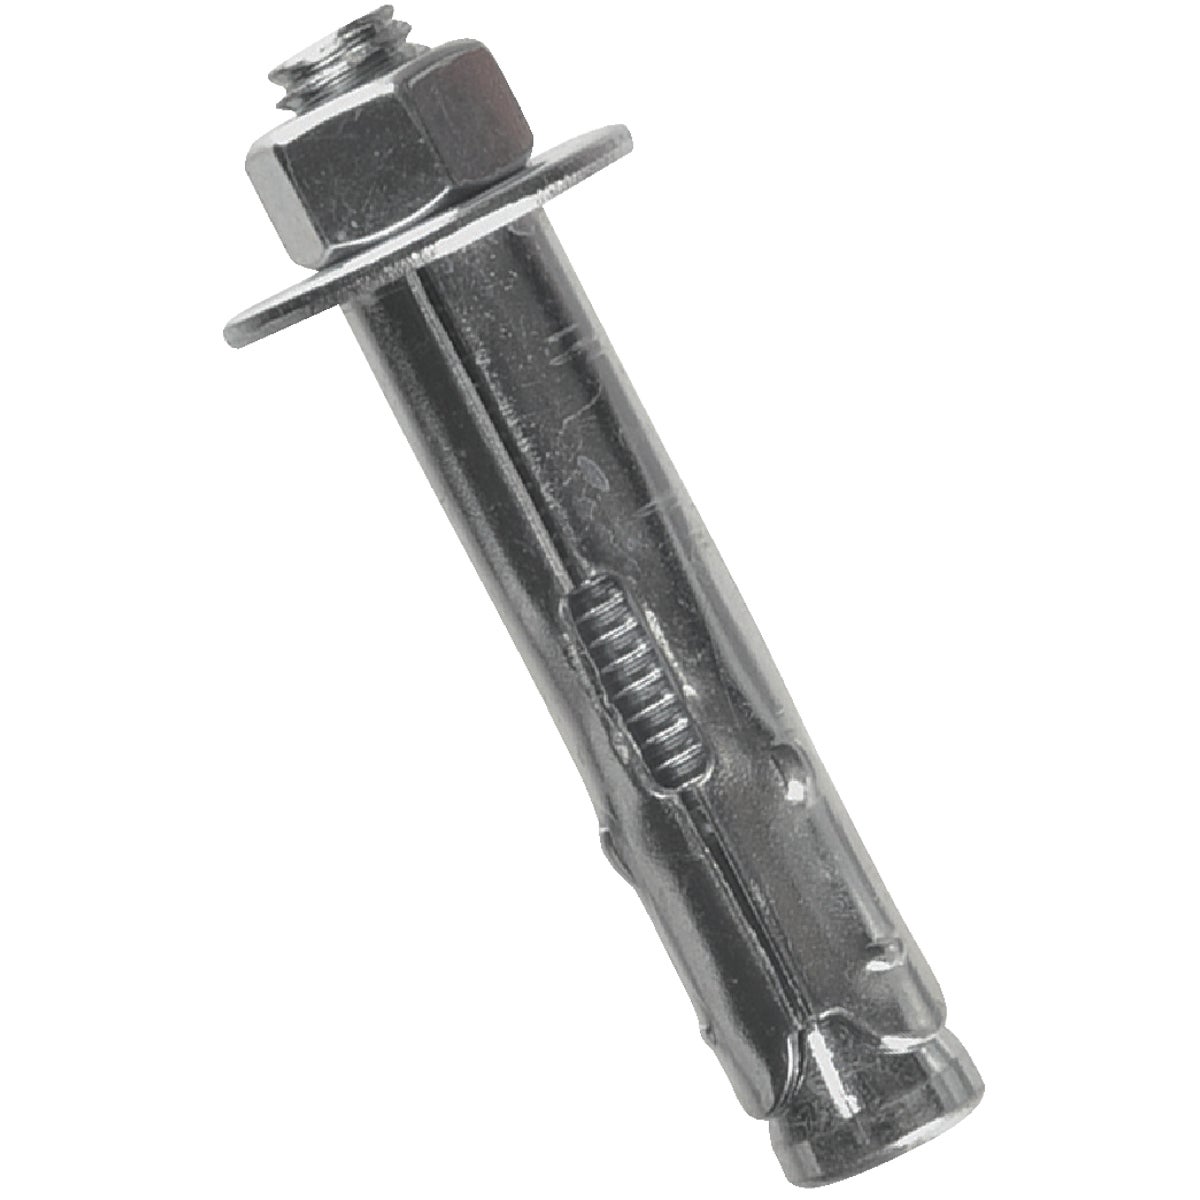 Red Head 1/2 In. x 2-1/4 In. Sleeve Stud Bolt Anchor